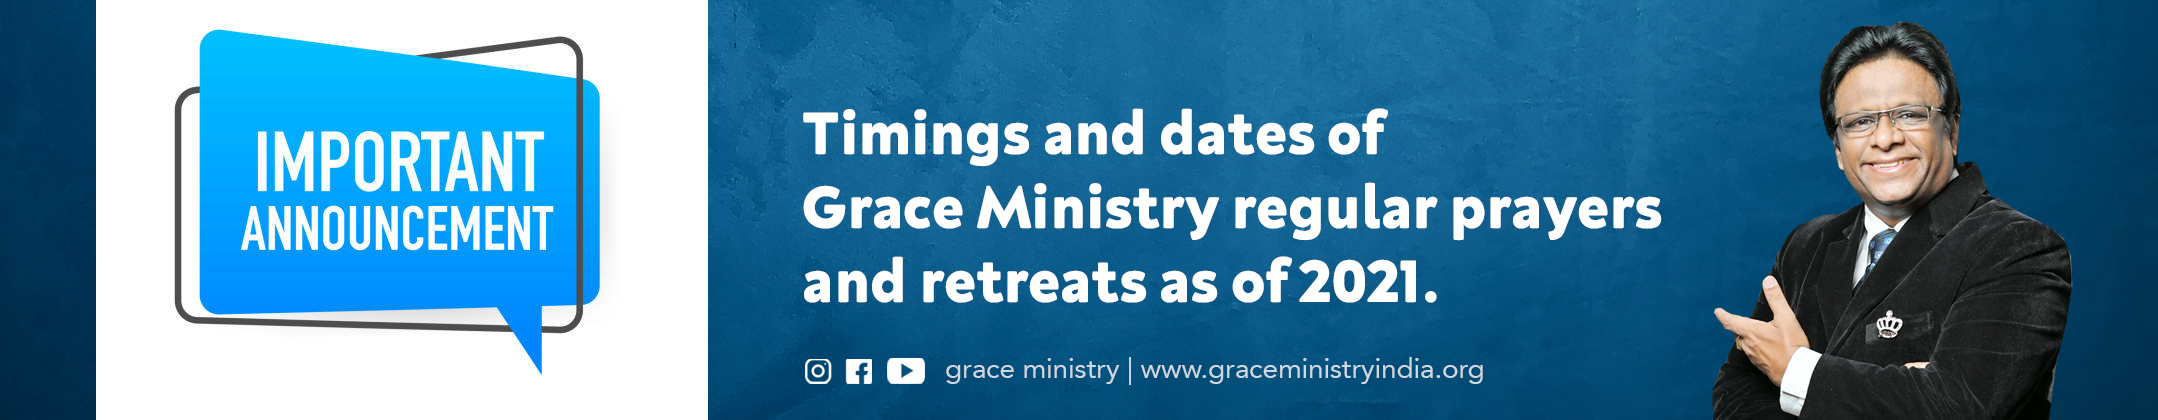 Dear Members, Followers and Readers here are detailed Prayer Timings and dates of regular prayers and retreats held at Grace Ministry in Mangalore as of 2021.